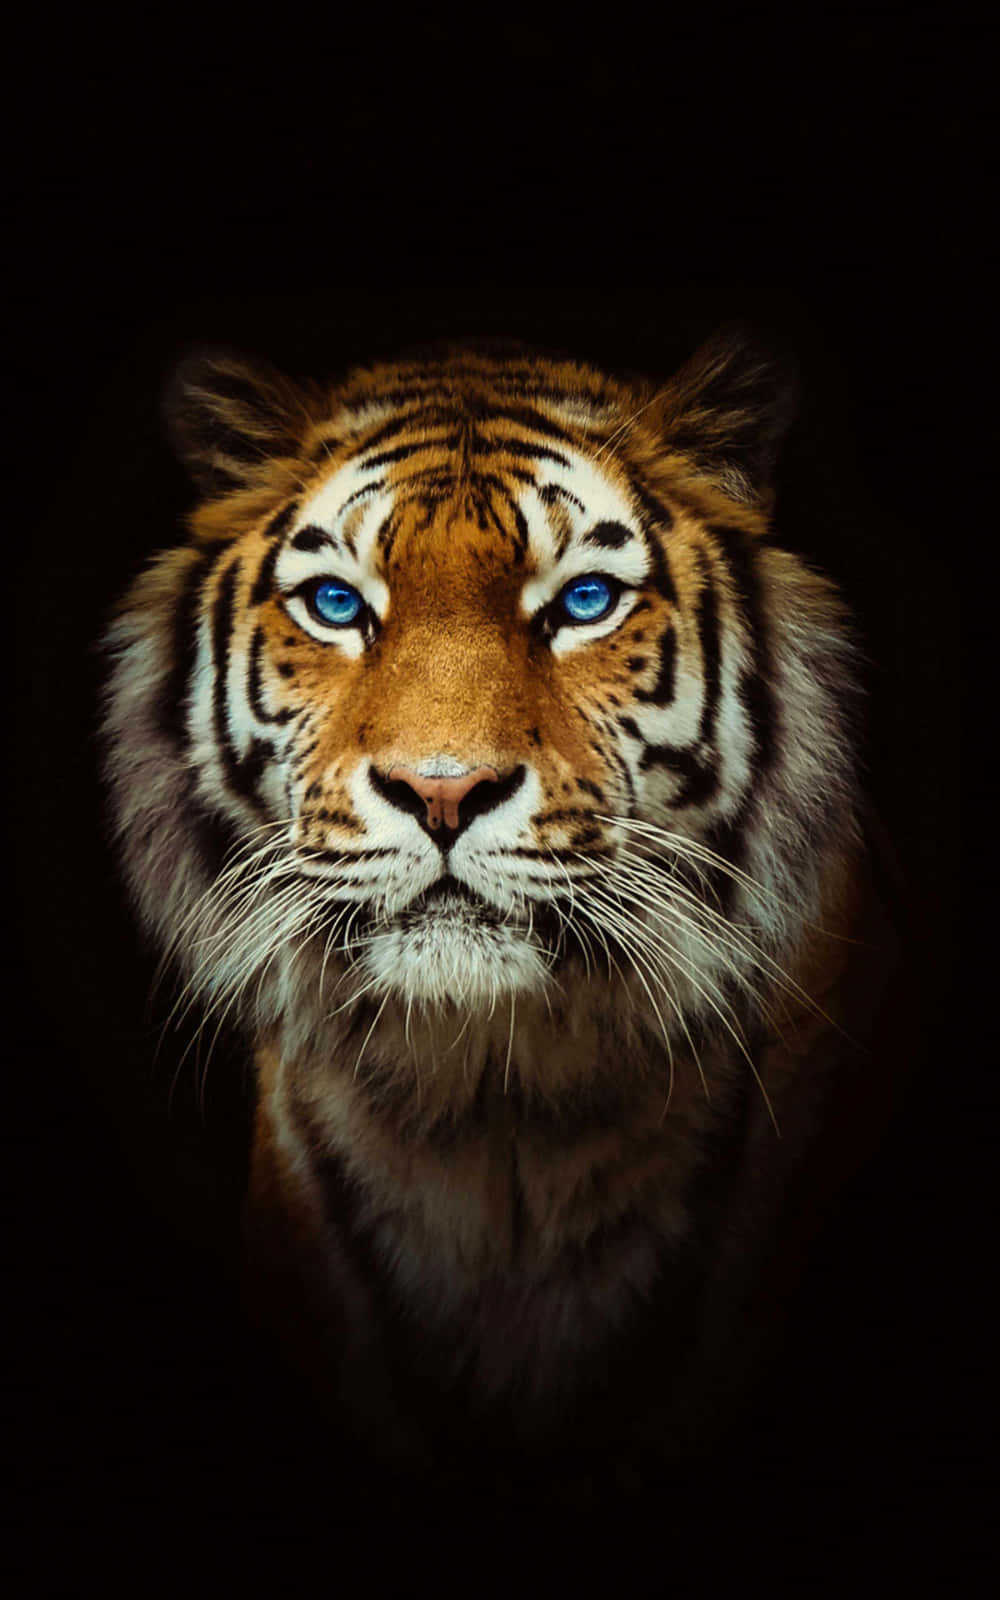 A Tiger With Blue Eyes On A Black Background Wallpaper